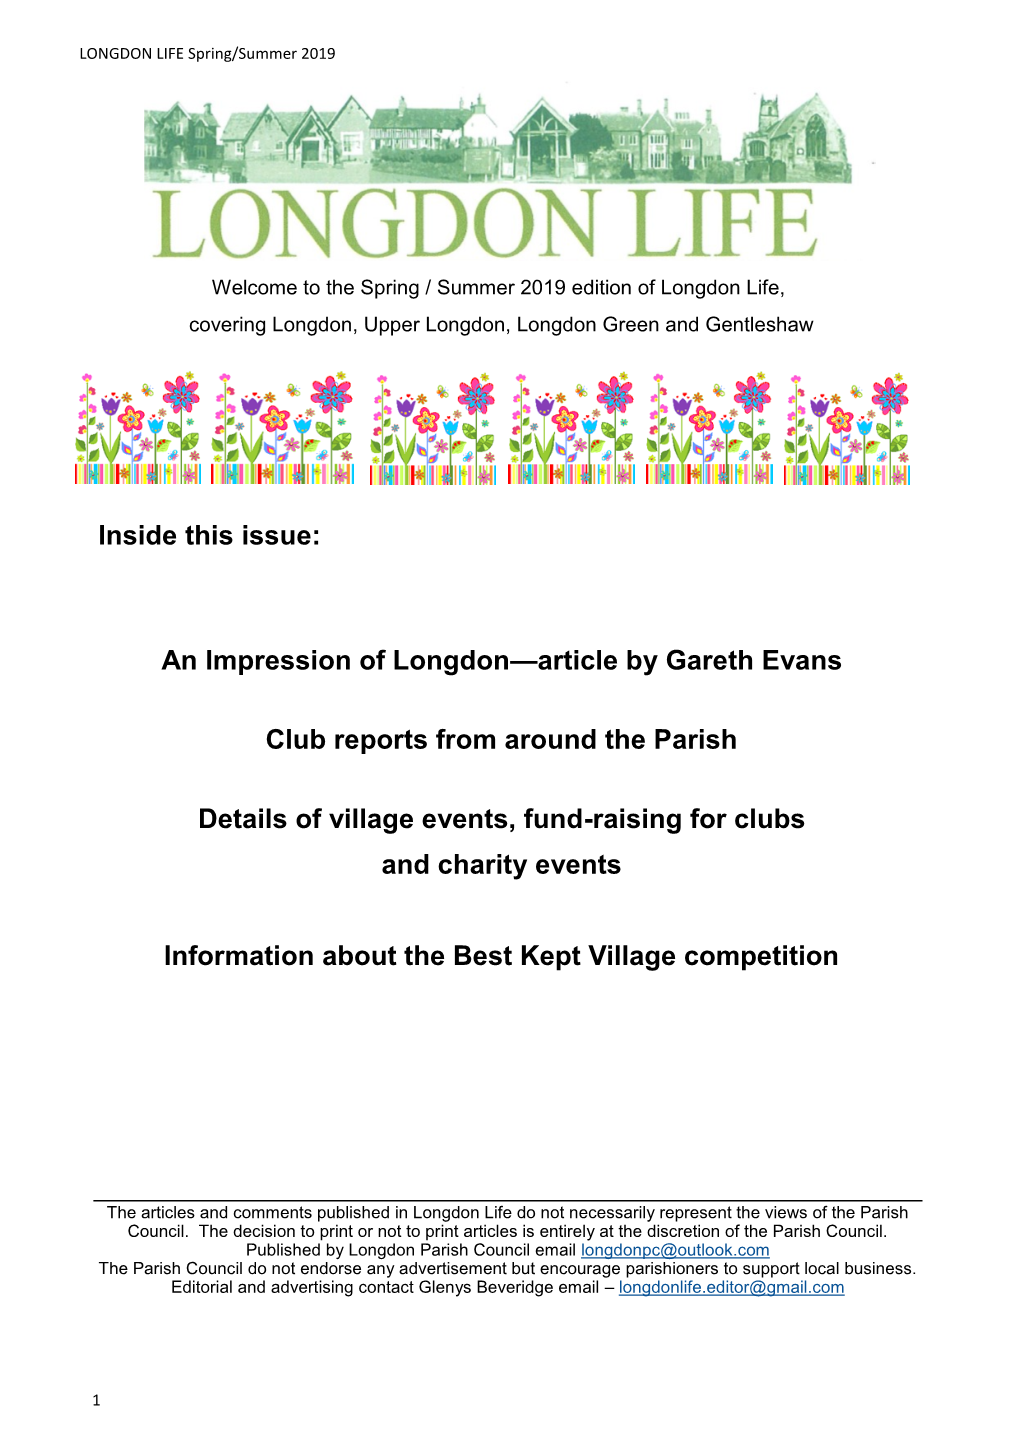 An Impression of Longdon—Article by Gareth Evans Club Reports From